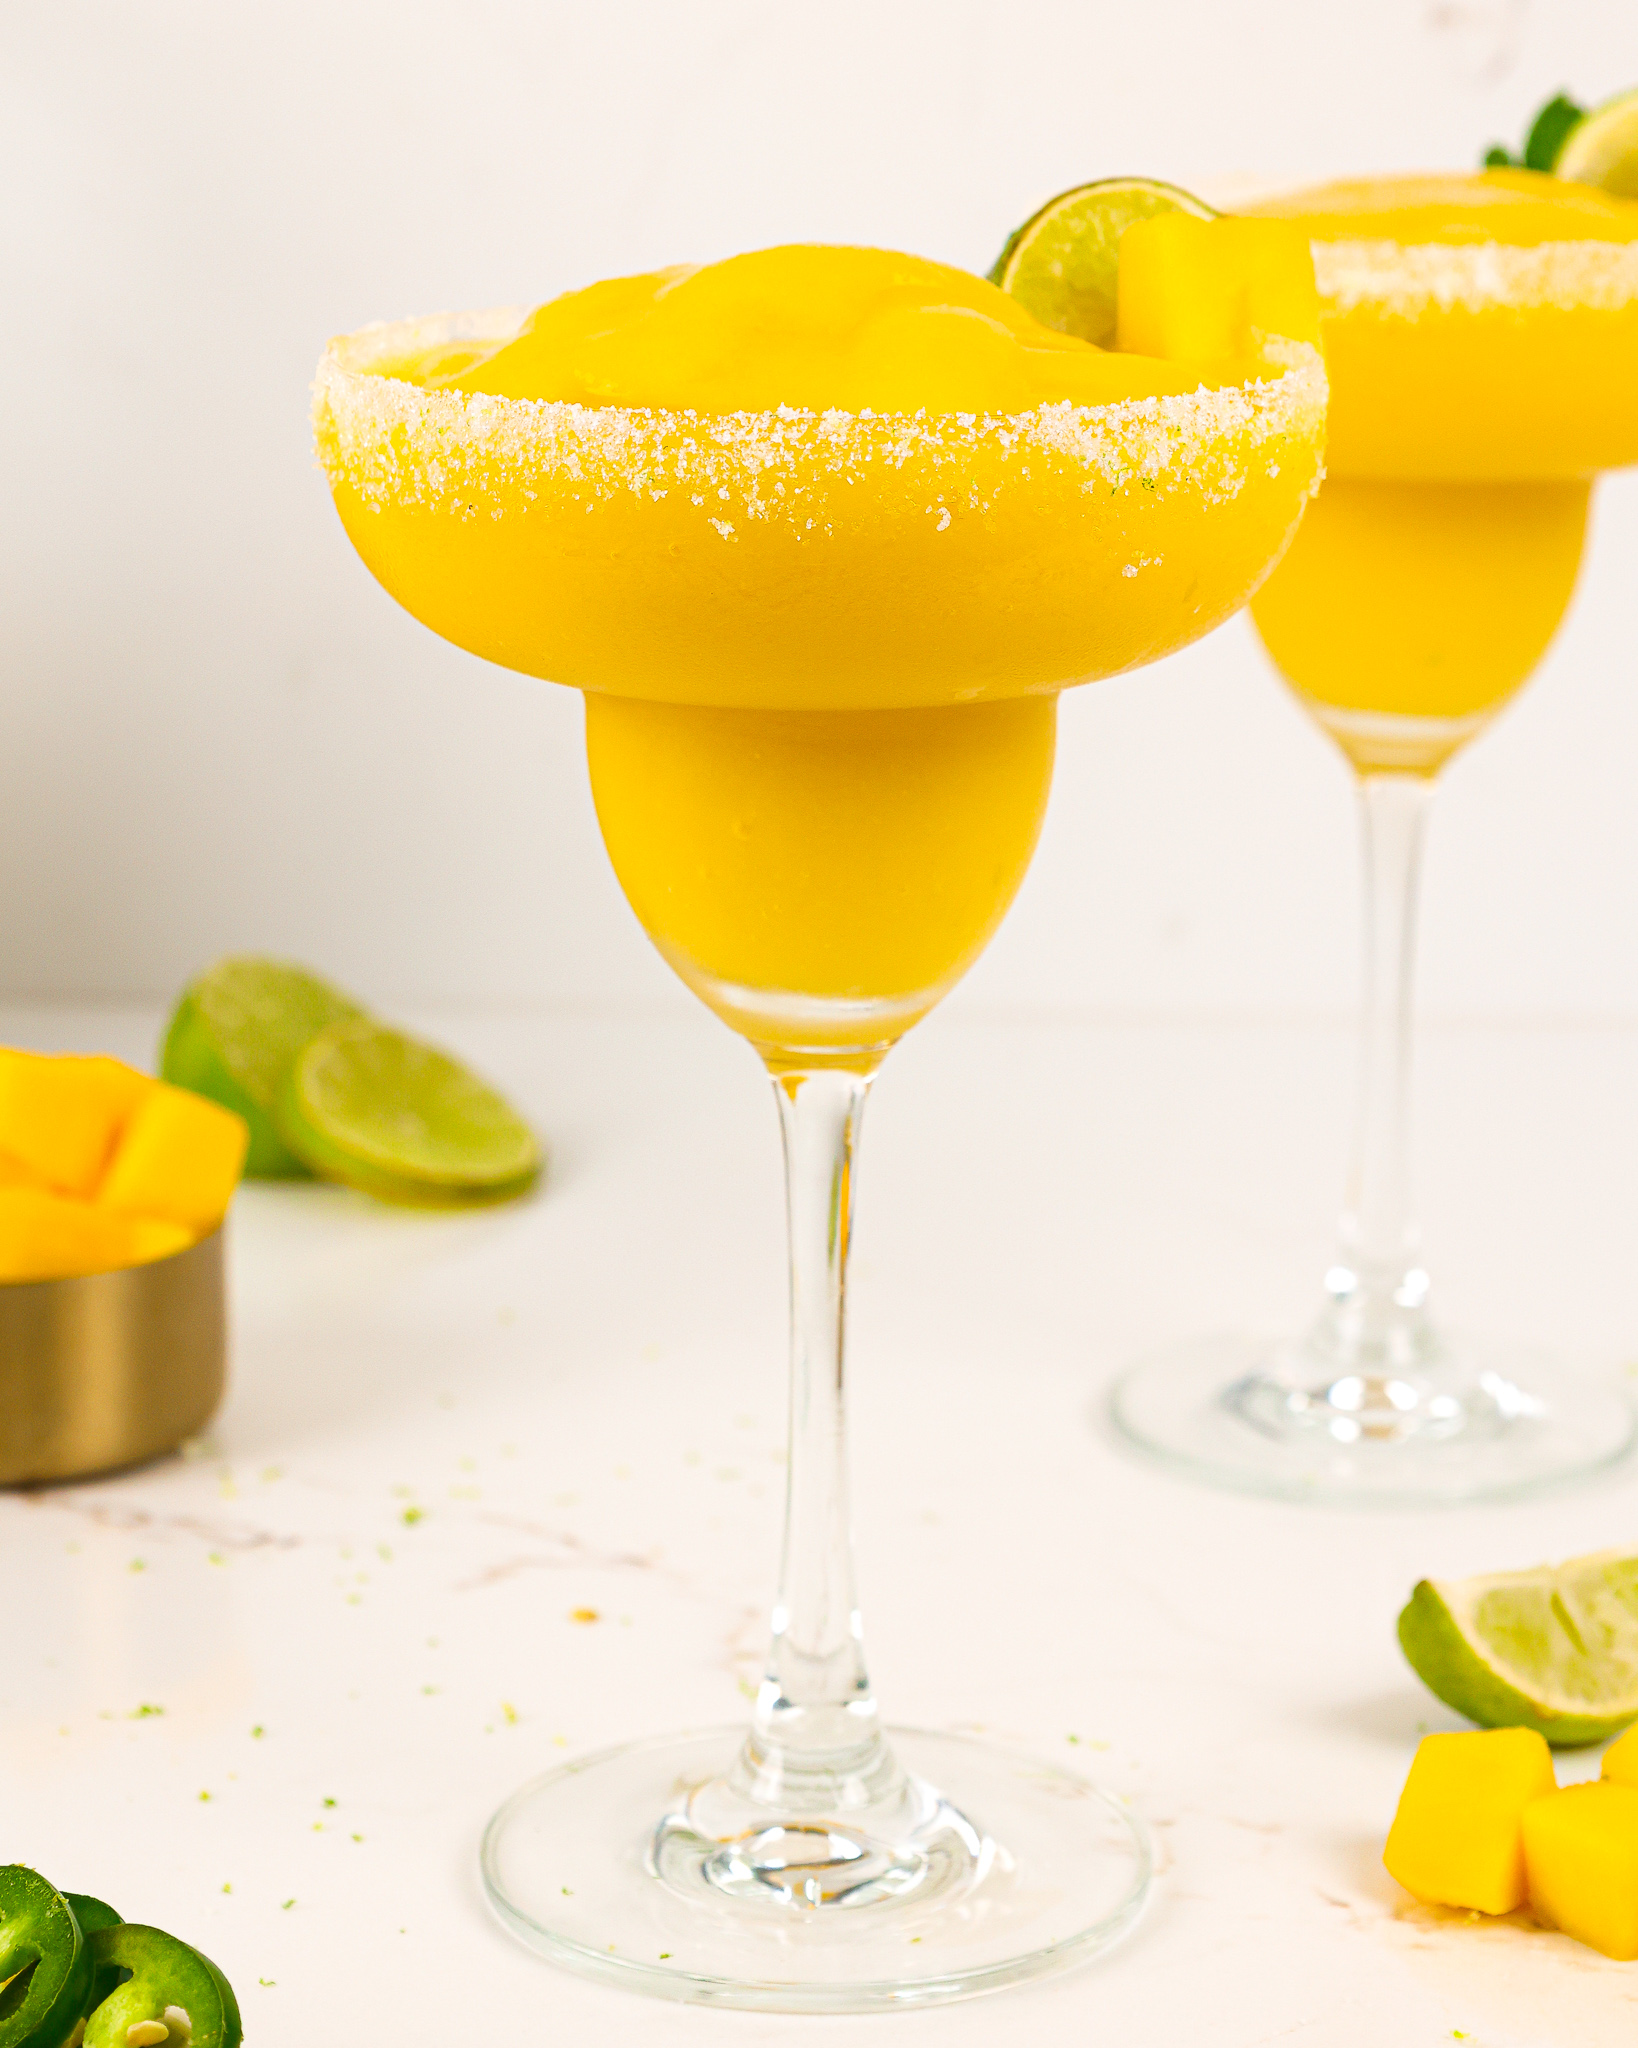 image of frozen mango margaritas blended in a blender that are smooth, creamy, and perfectly sweet and spicy